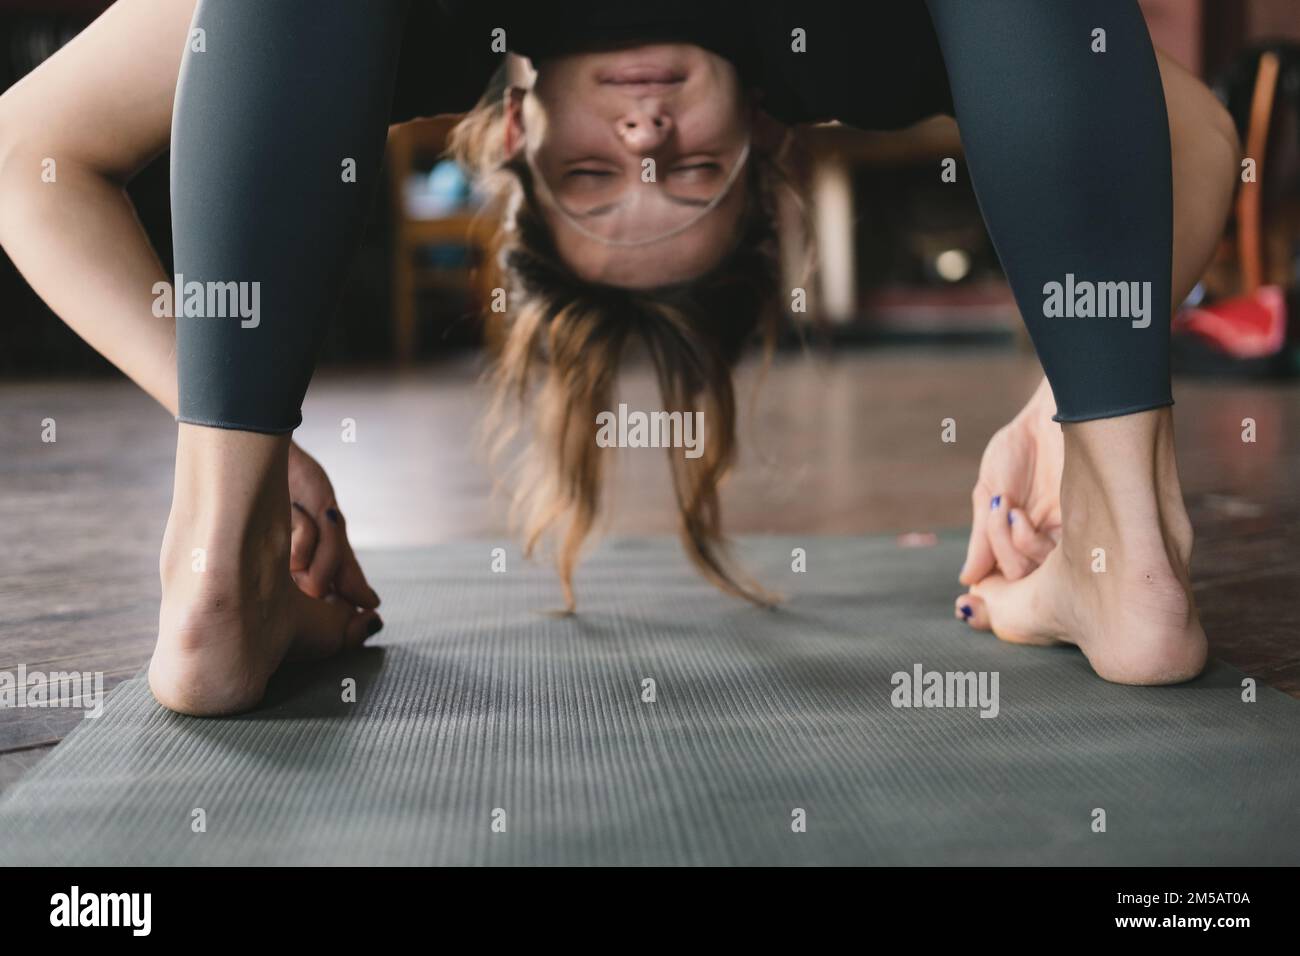 Close-up photo of a female new yoga teacher doing a standing forward fold pose variation hooking big toe during her vinyasa flow yoga practice Stock Photo